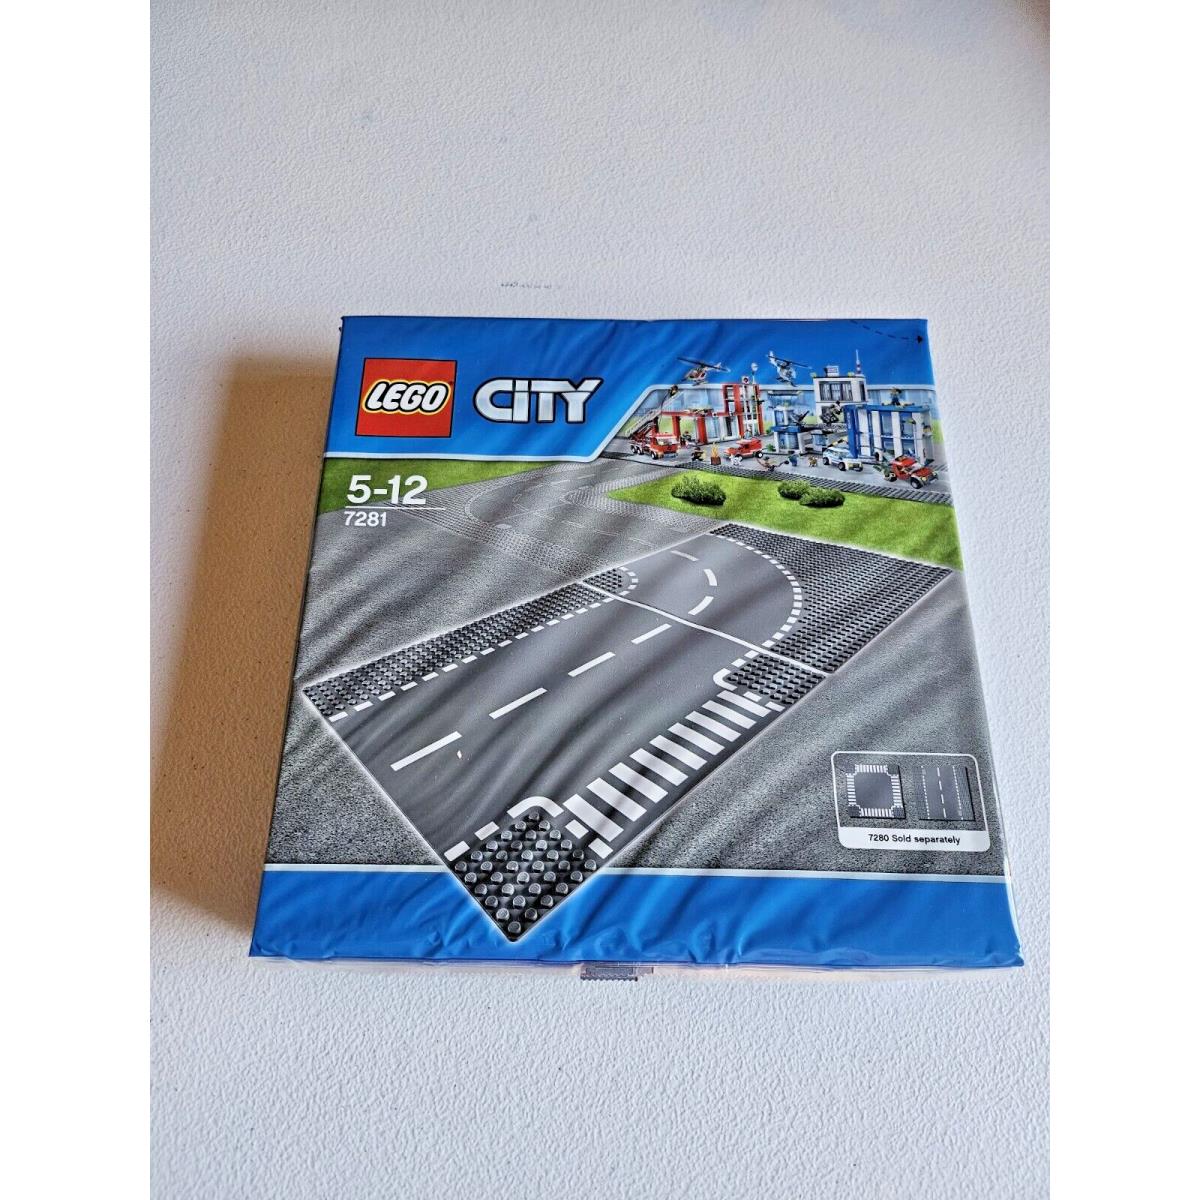 2 Sets of Lego City 7281 T-junction and Curve Plate